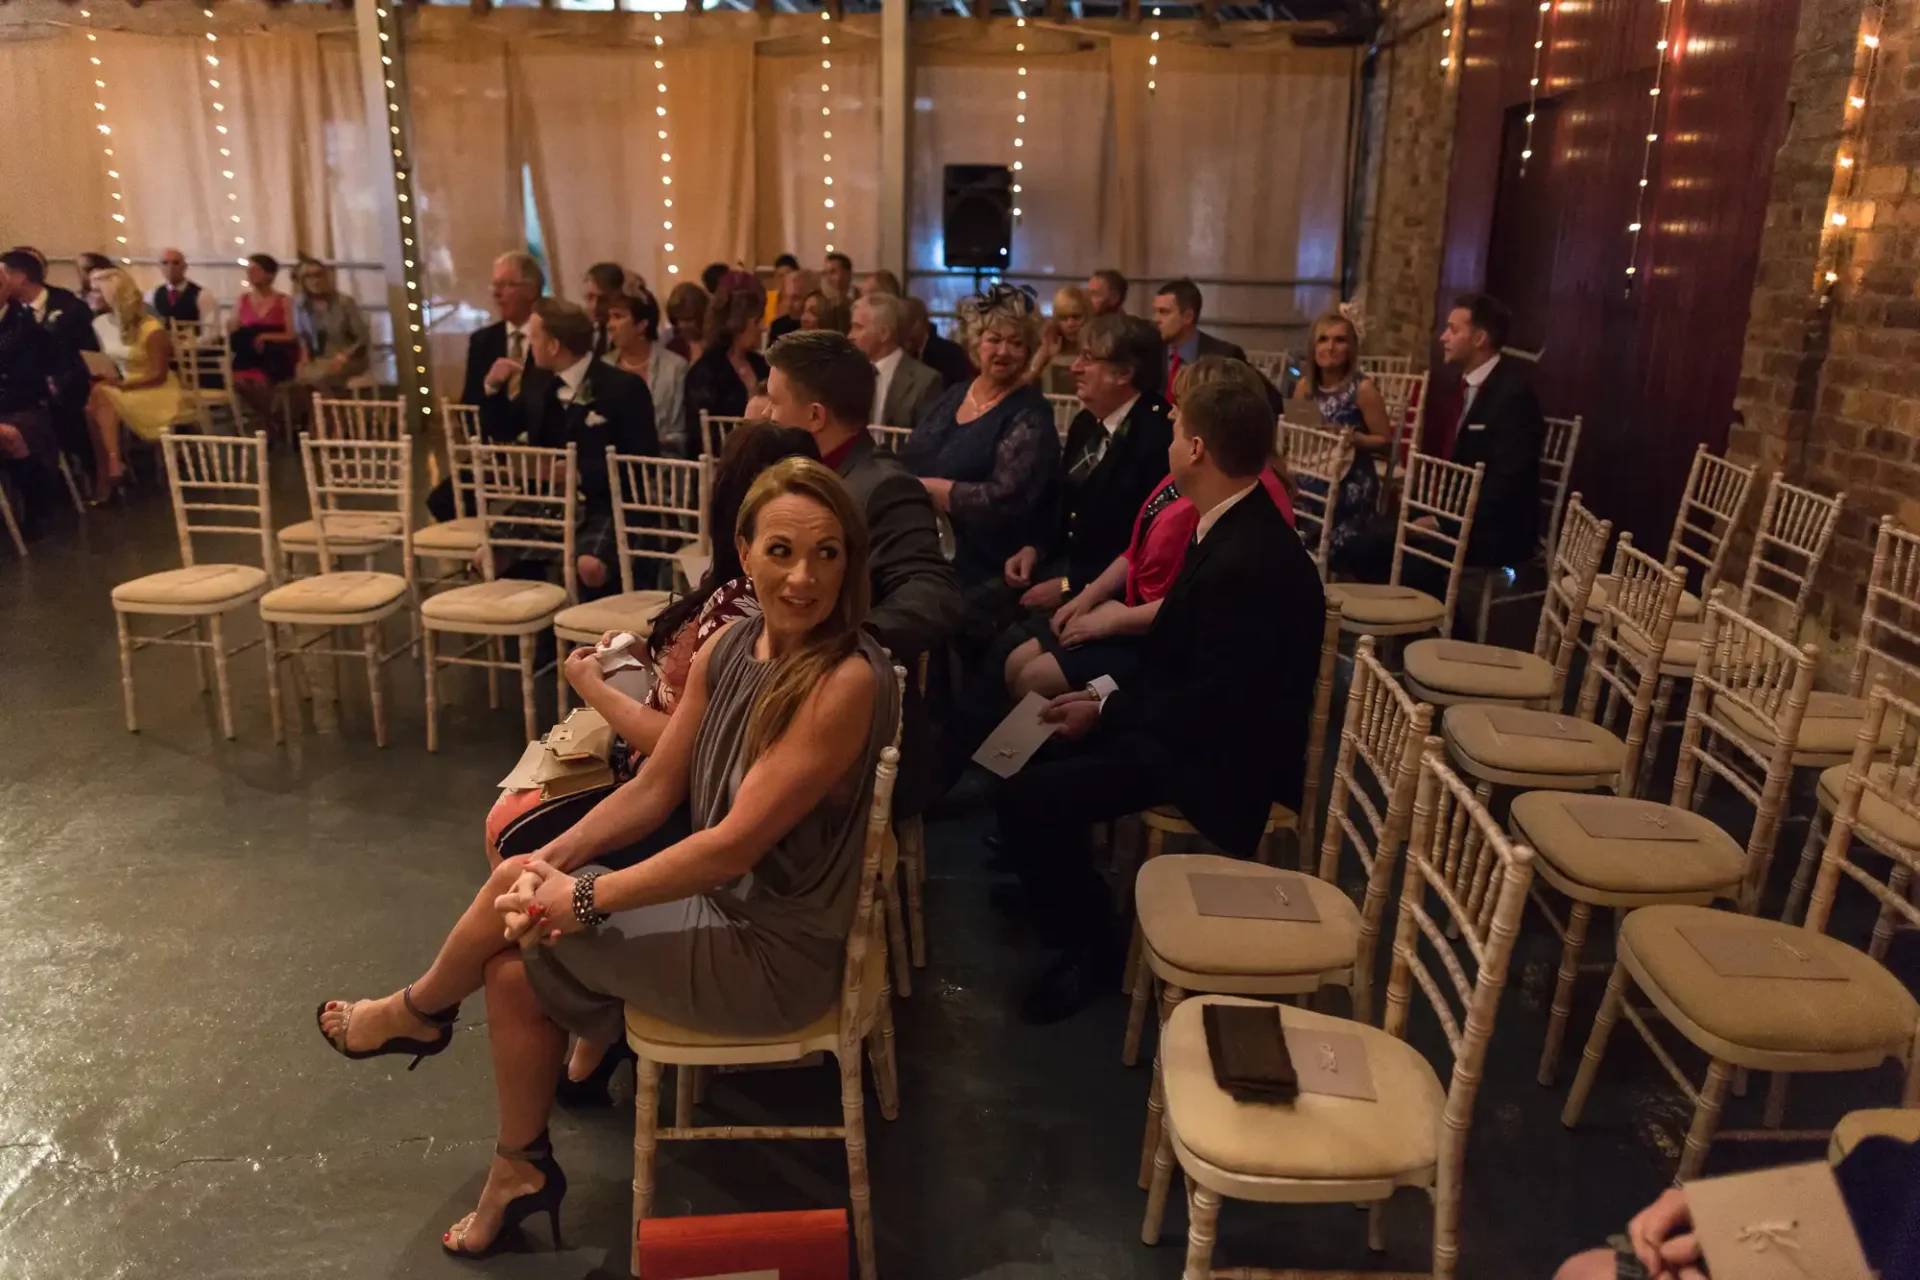 Guests seated on chairs at an indoor wedding venue with string lights, looking towards the front where the ceremony is taking place.